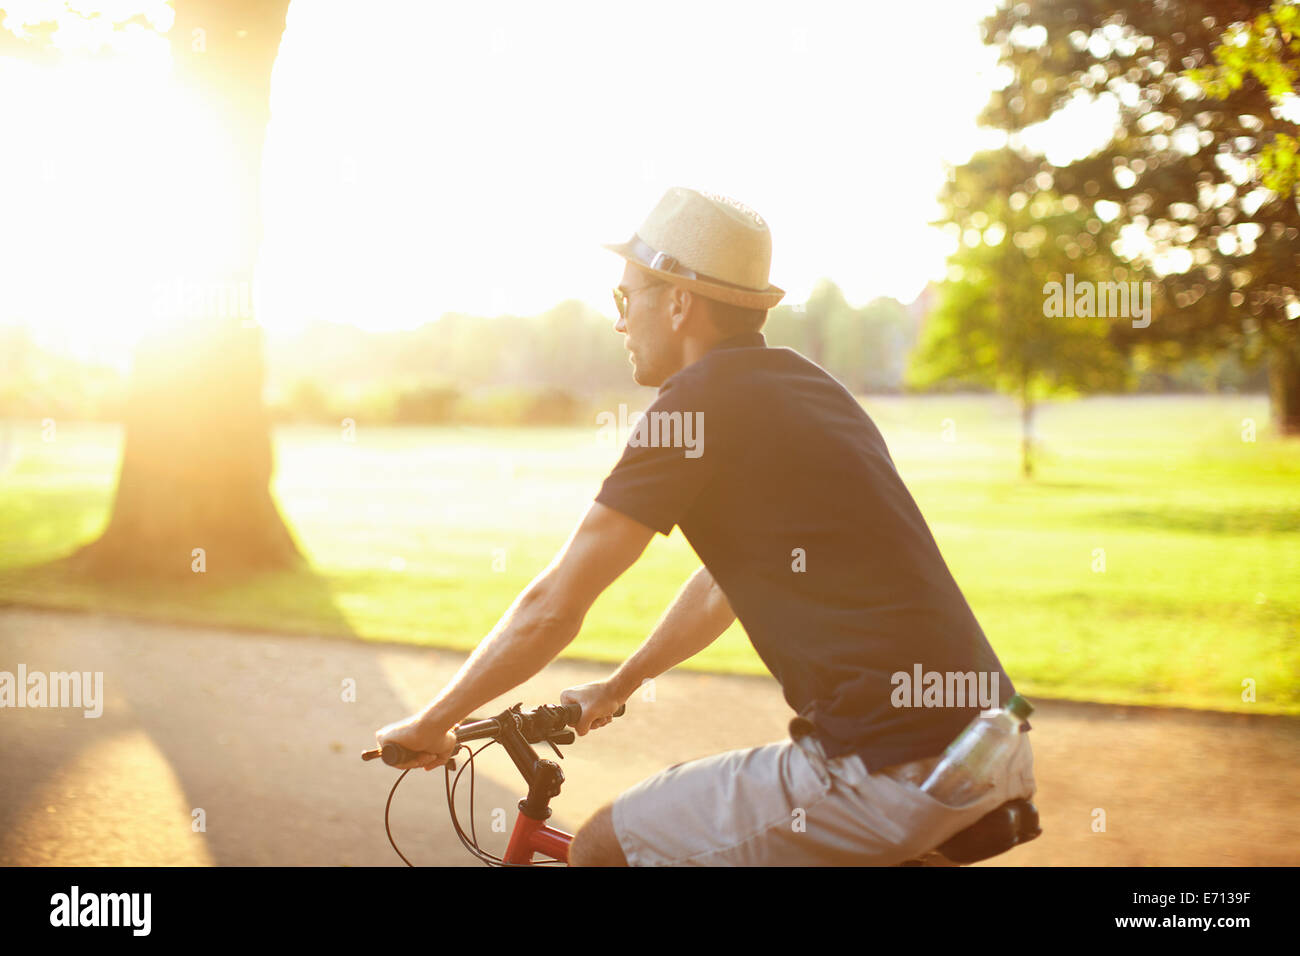 Mid adult man riding bicycle in sunlit park Banque D'Images